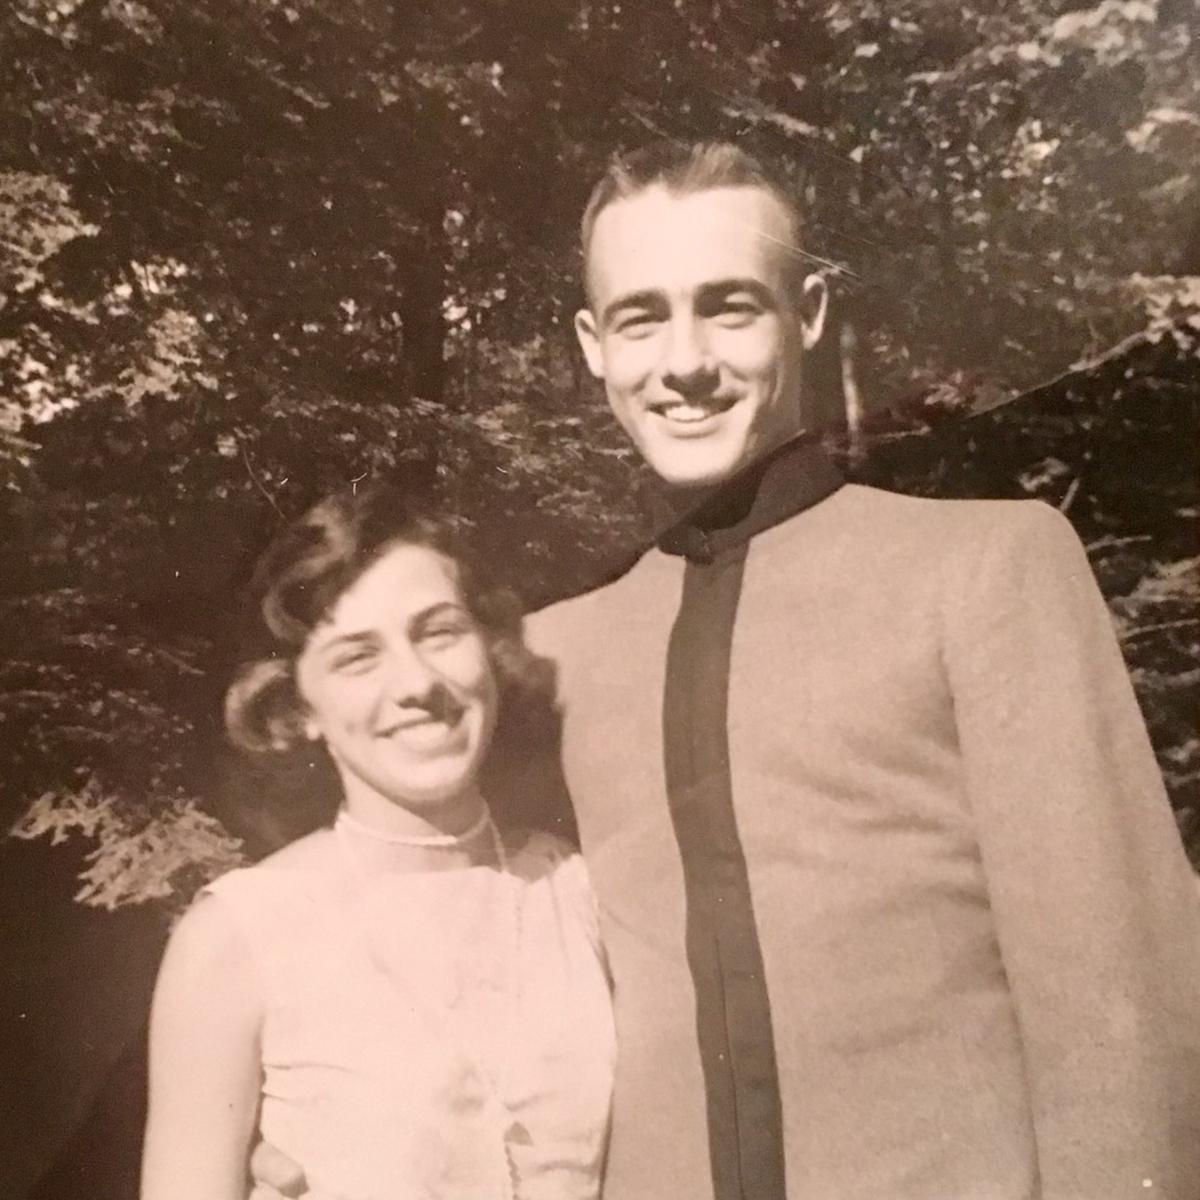 Karen and Arthur met as teenagers and have been in love ever since. (Courtesy of <a href="https://www.tiktok.com/@sydneygbrown">Sydney Brown</a>)